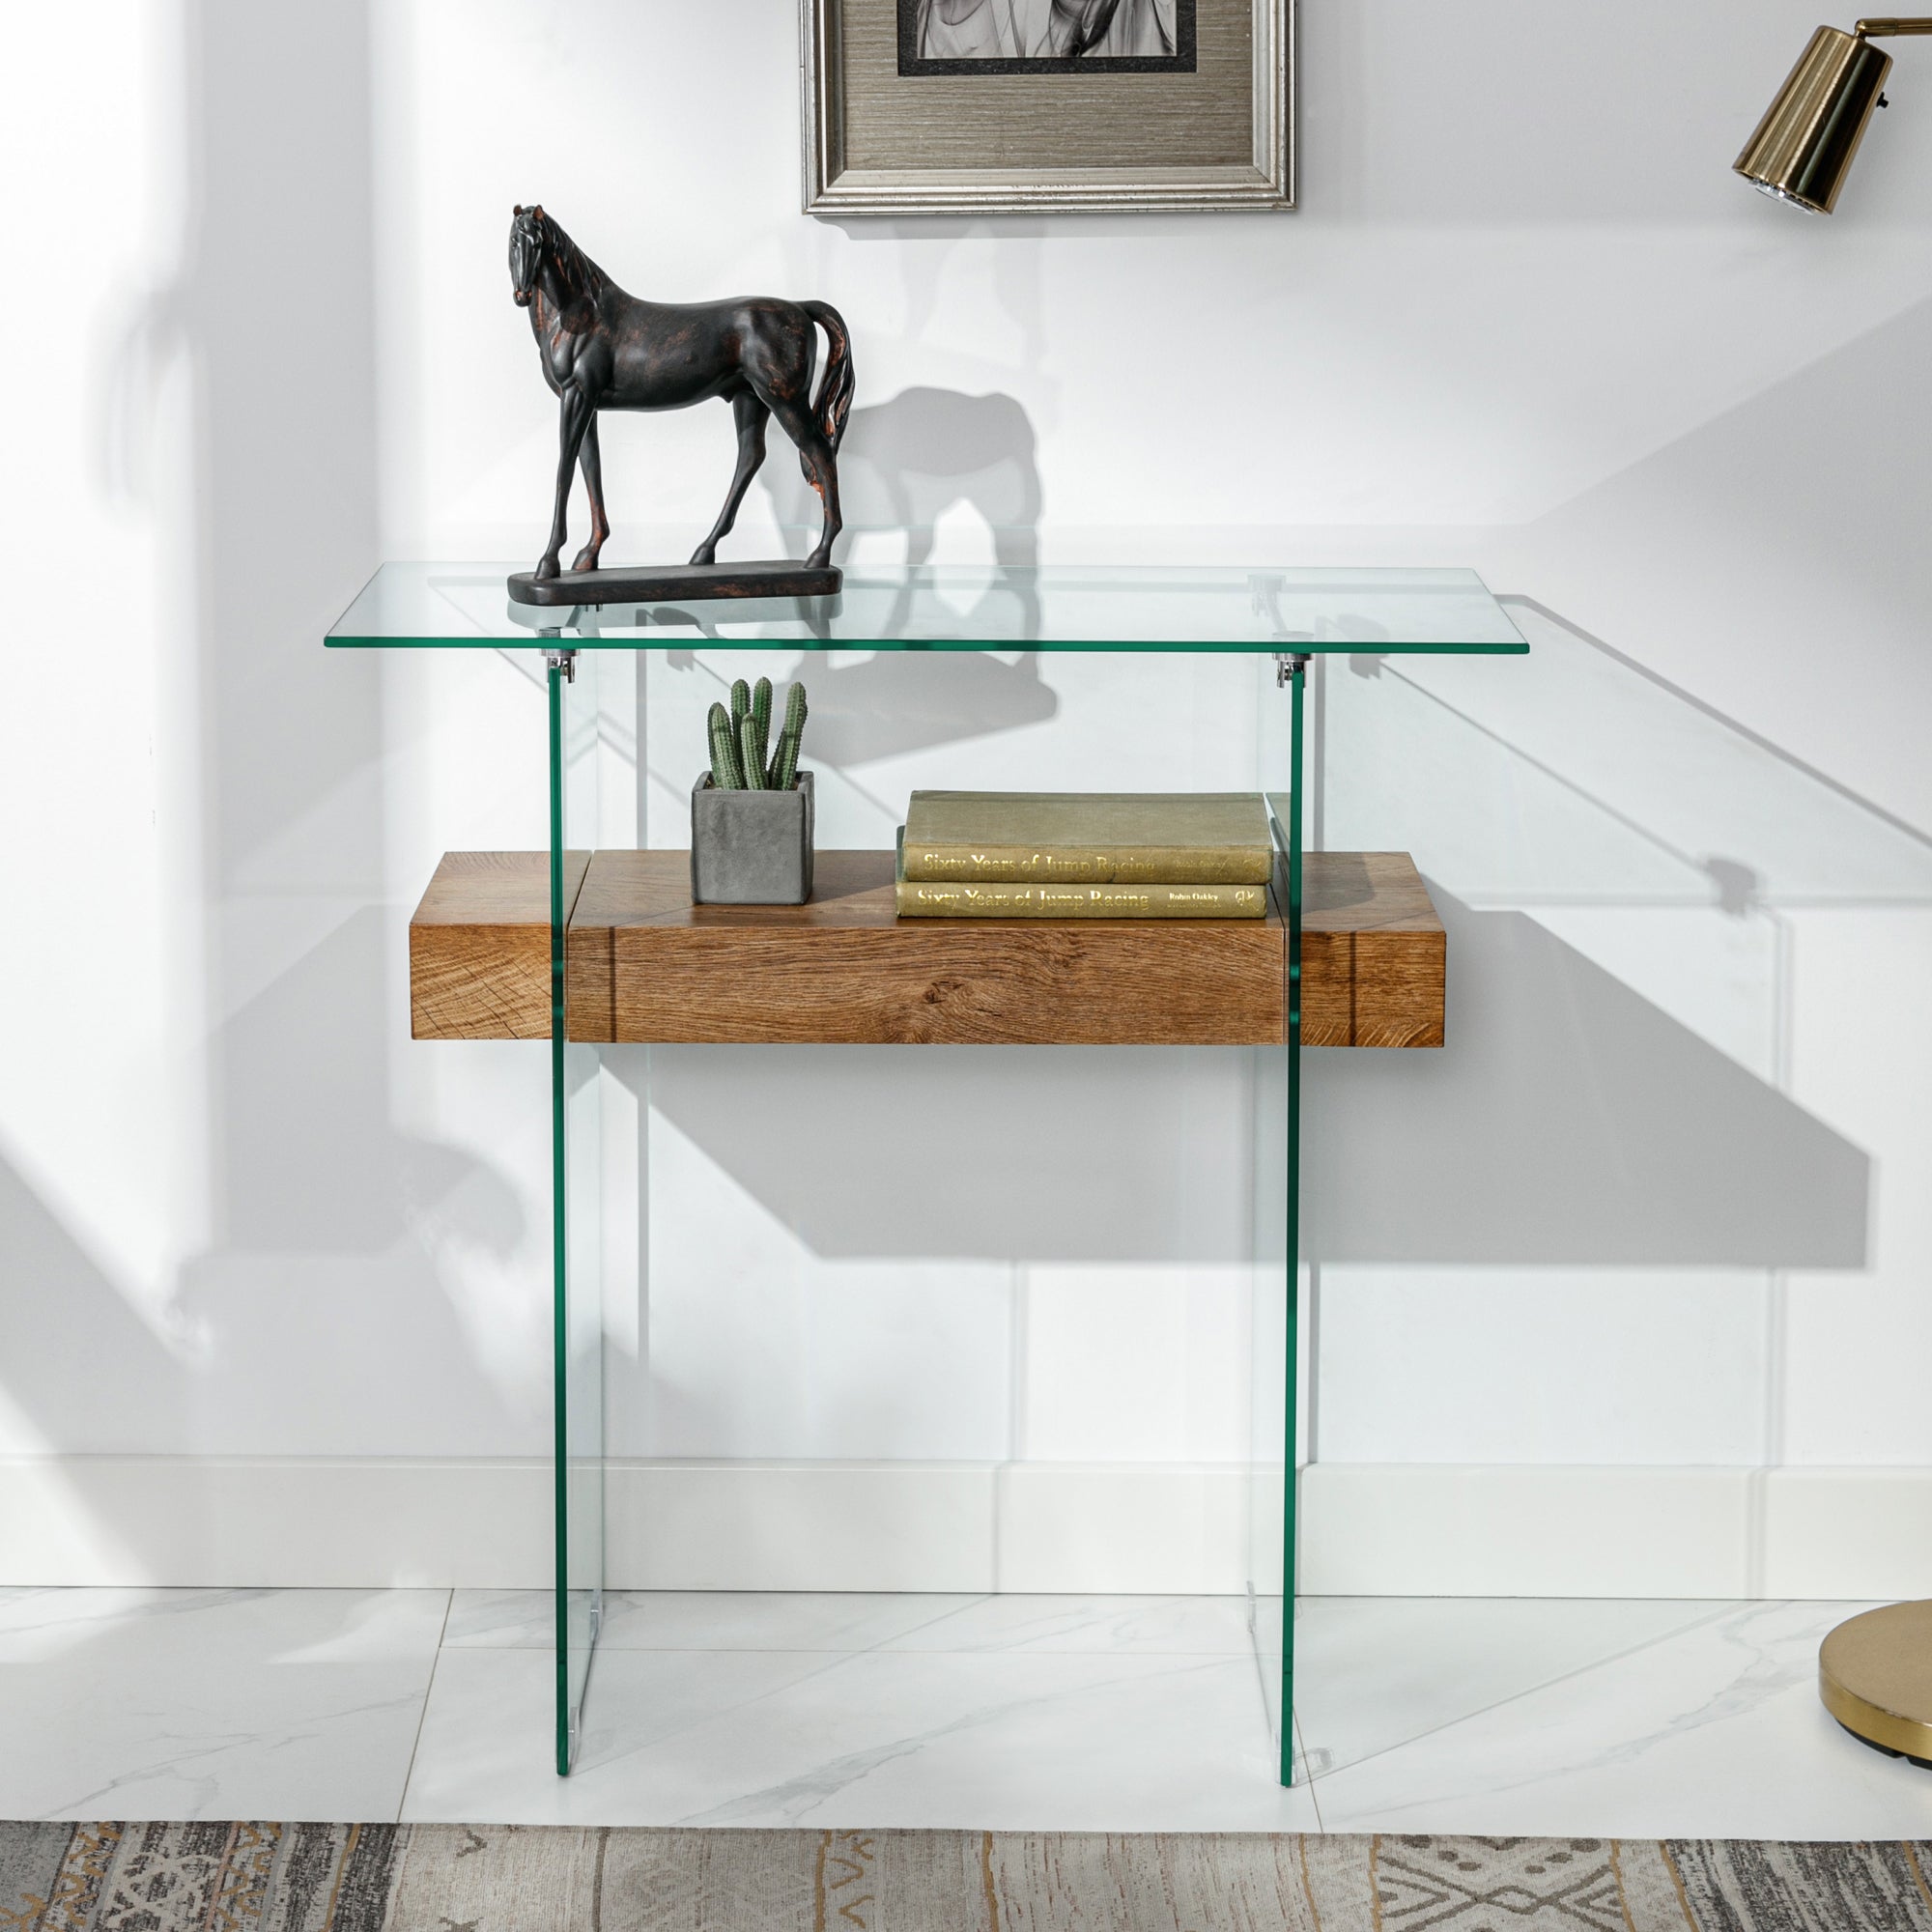 ivinta Narrow Glass Console Table with Storage, 31.5'' Modern Sofa Table for Small Space, Small Entryway Table with Natural Wood Shelves for Living Room, Hallway